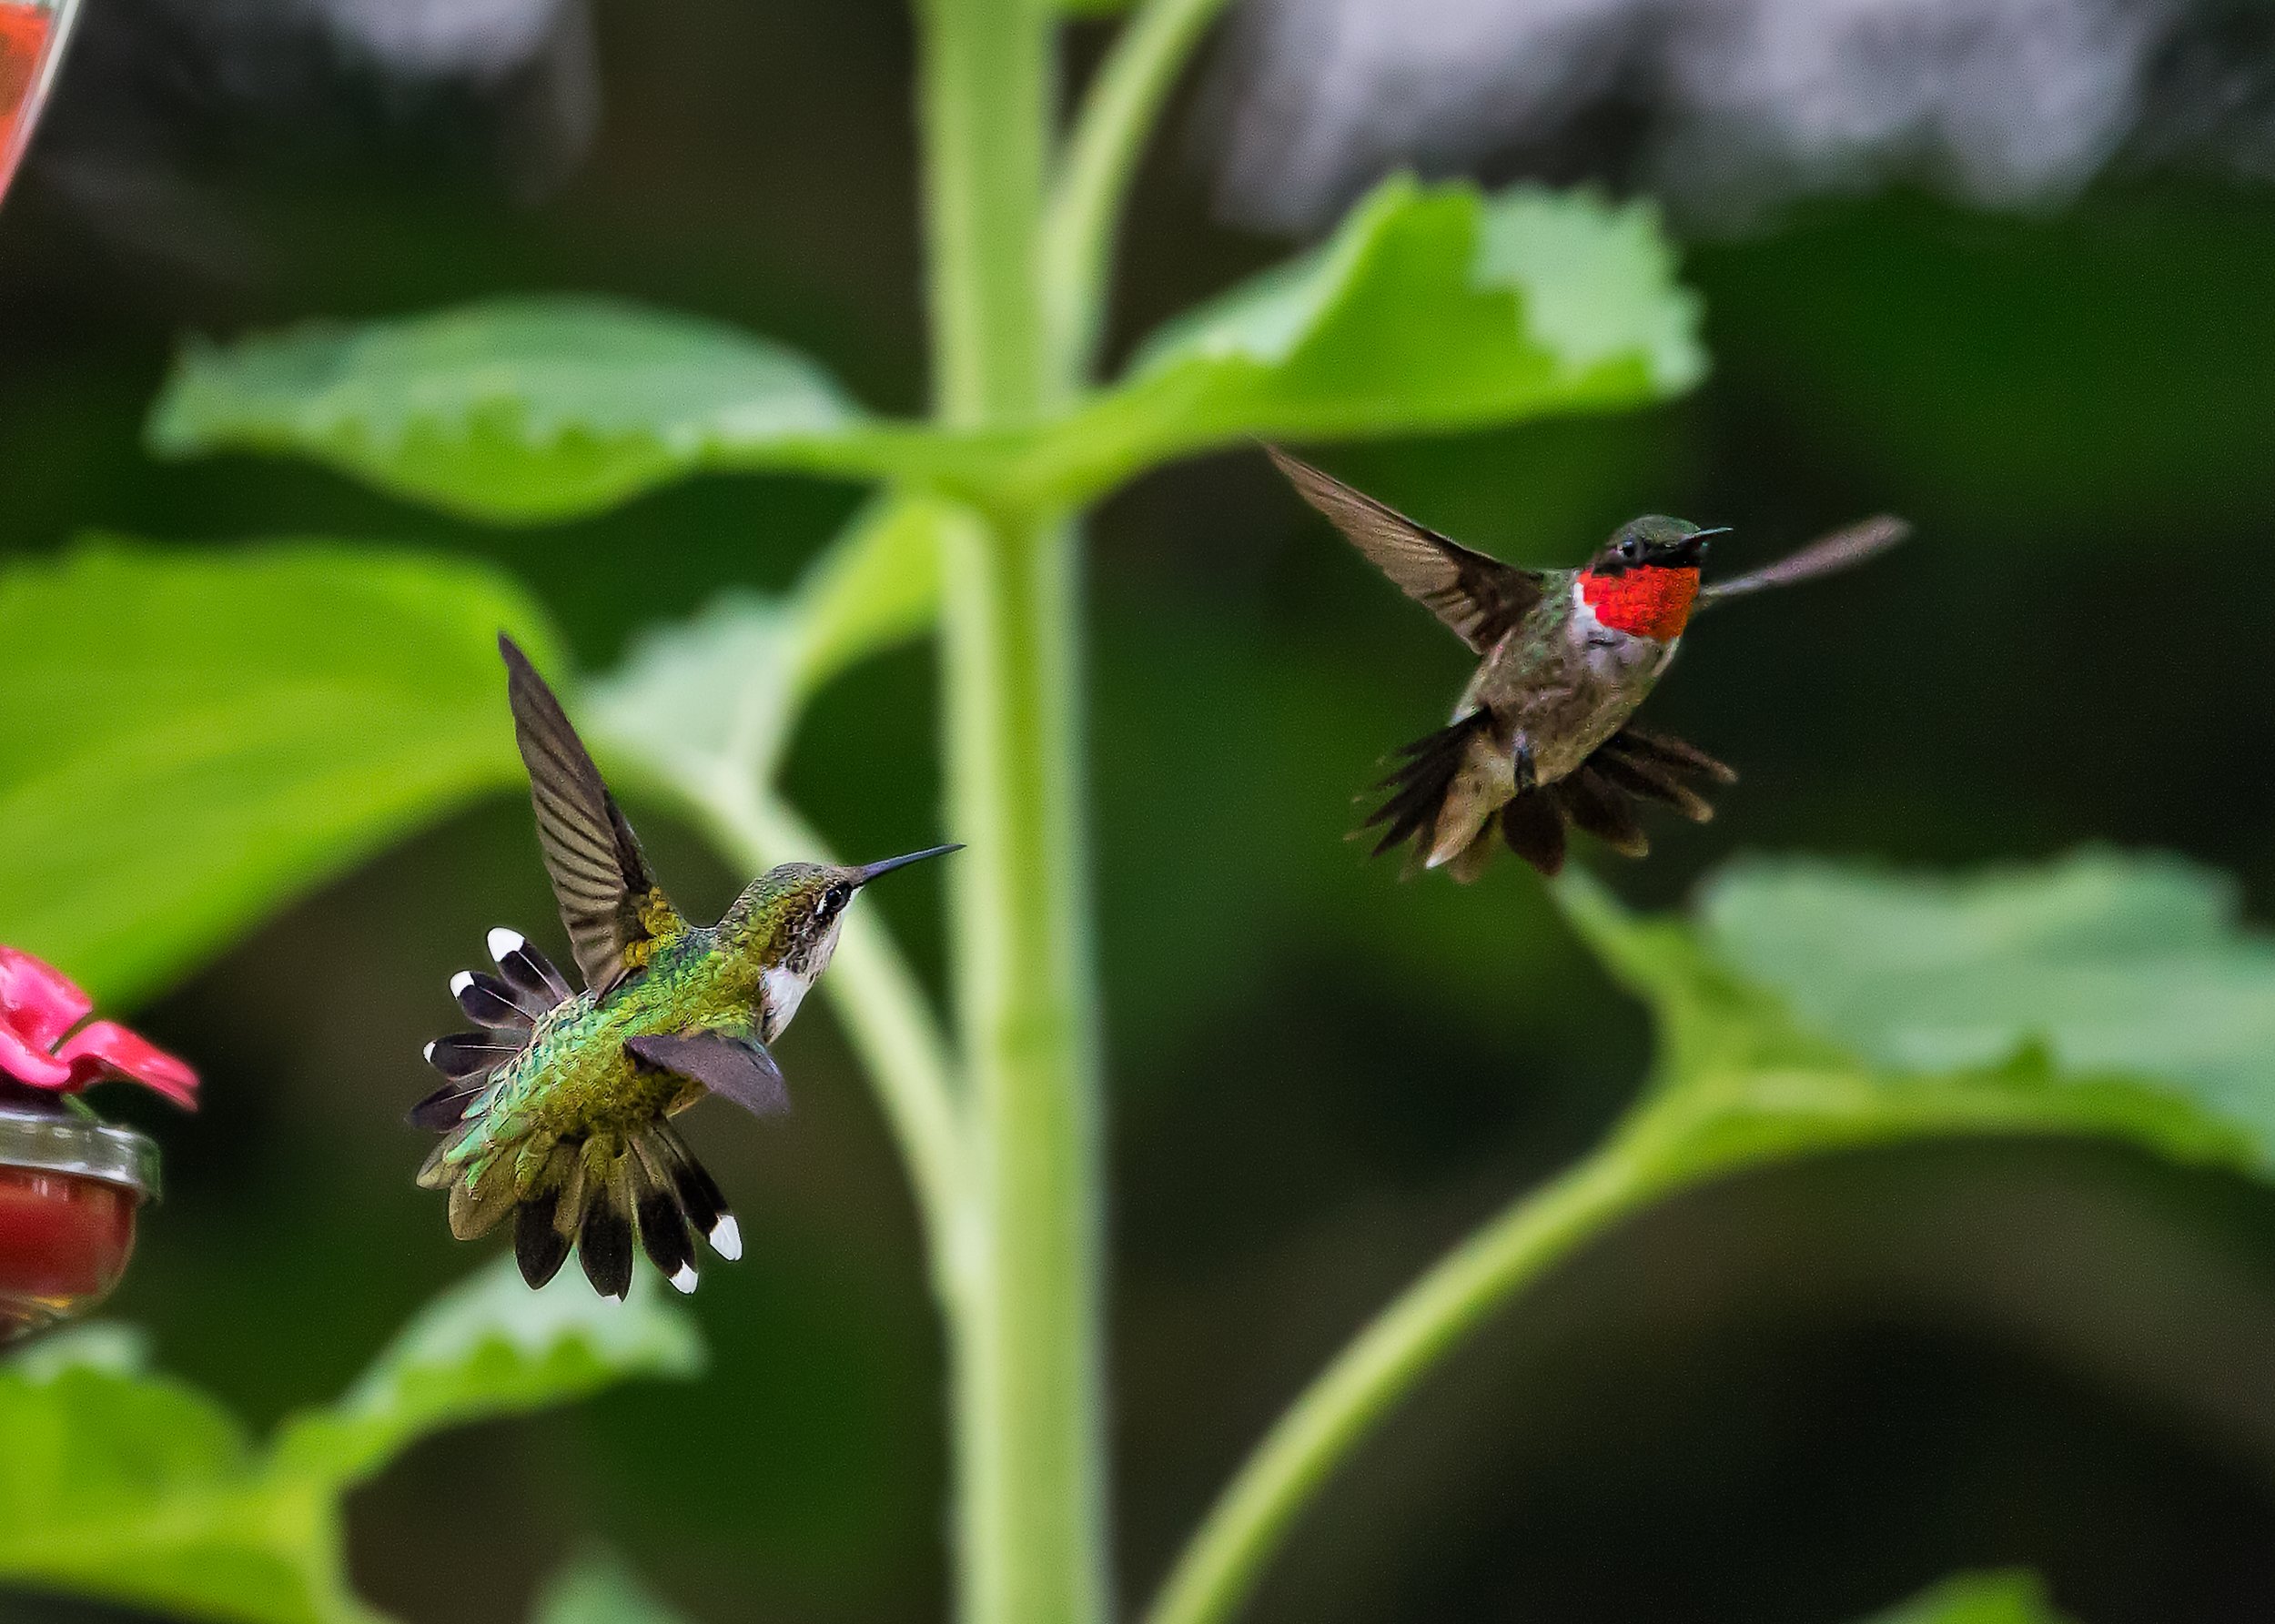 A photo of two hummingbirds in flight near a stalky, green plant.